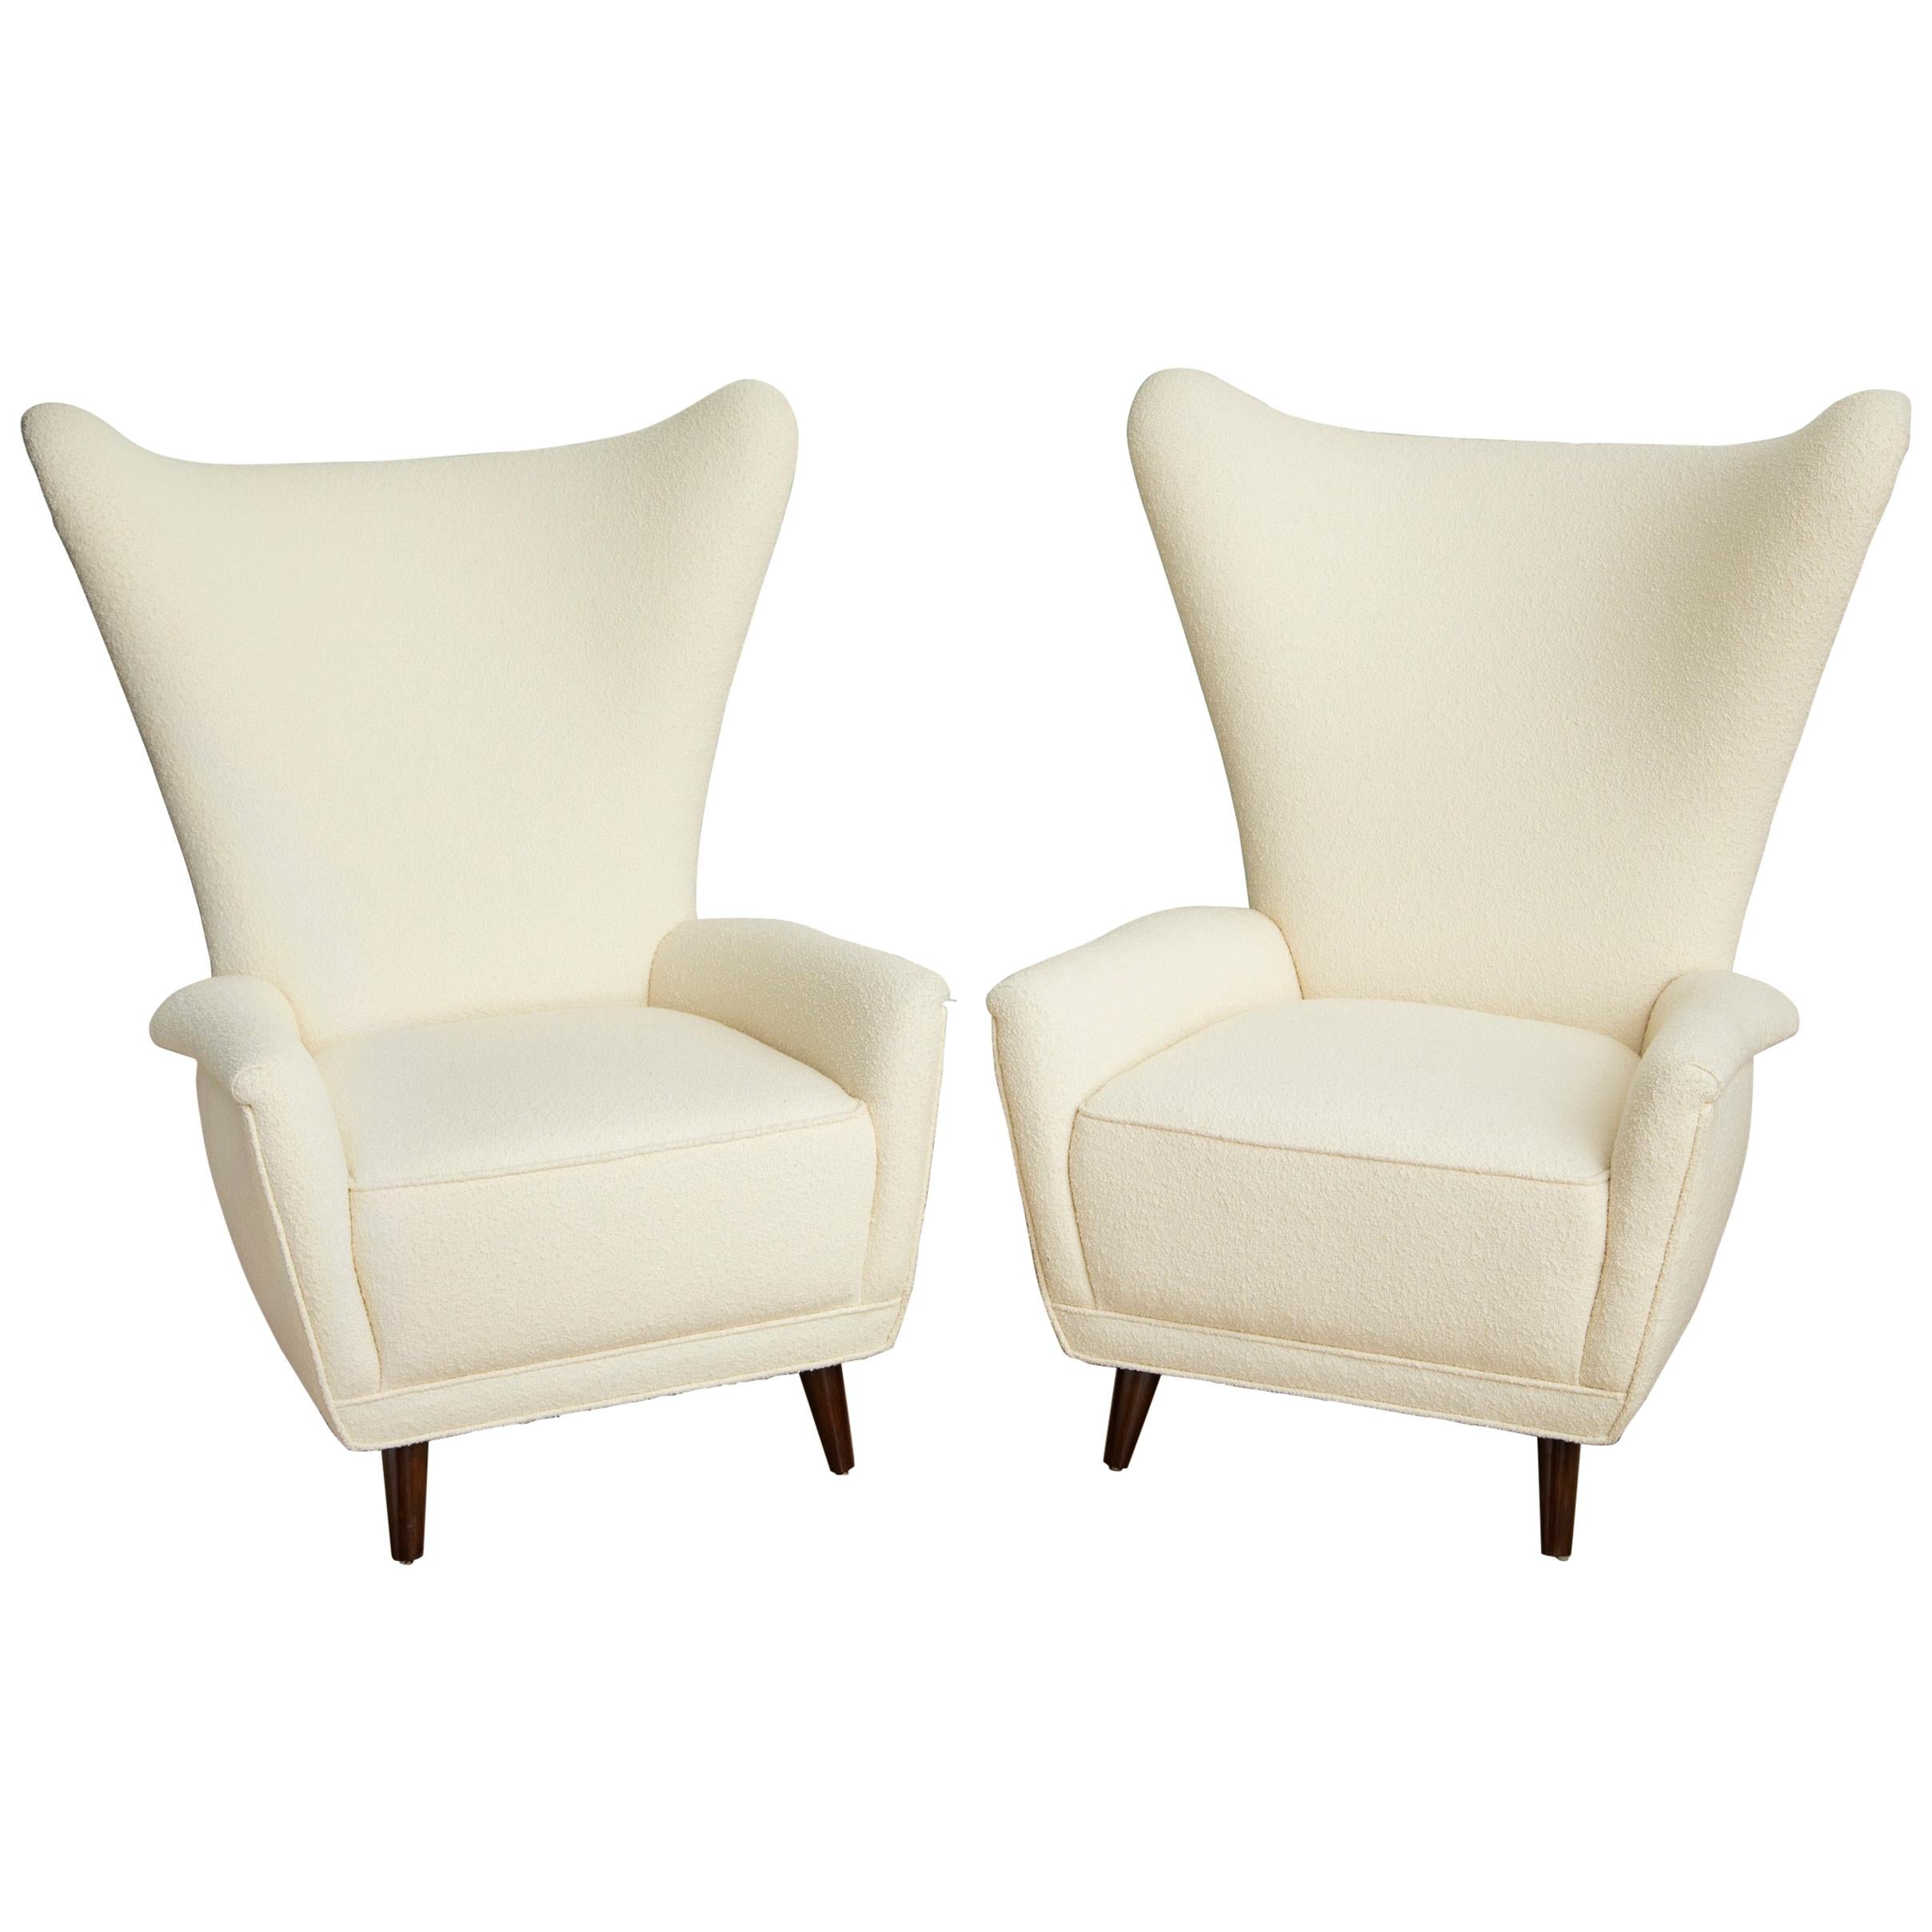 Pair of Mid-Century Modern Wingback Lounge Chairs